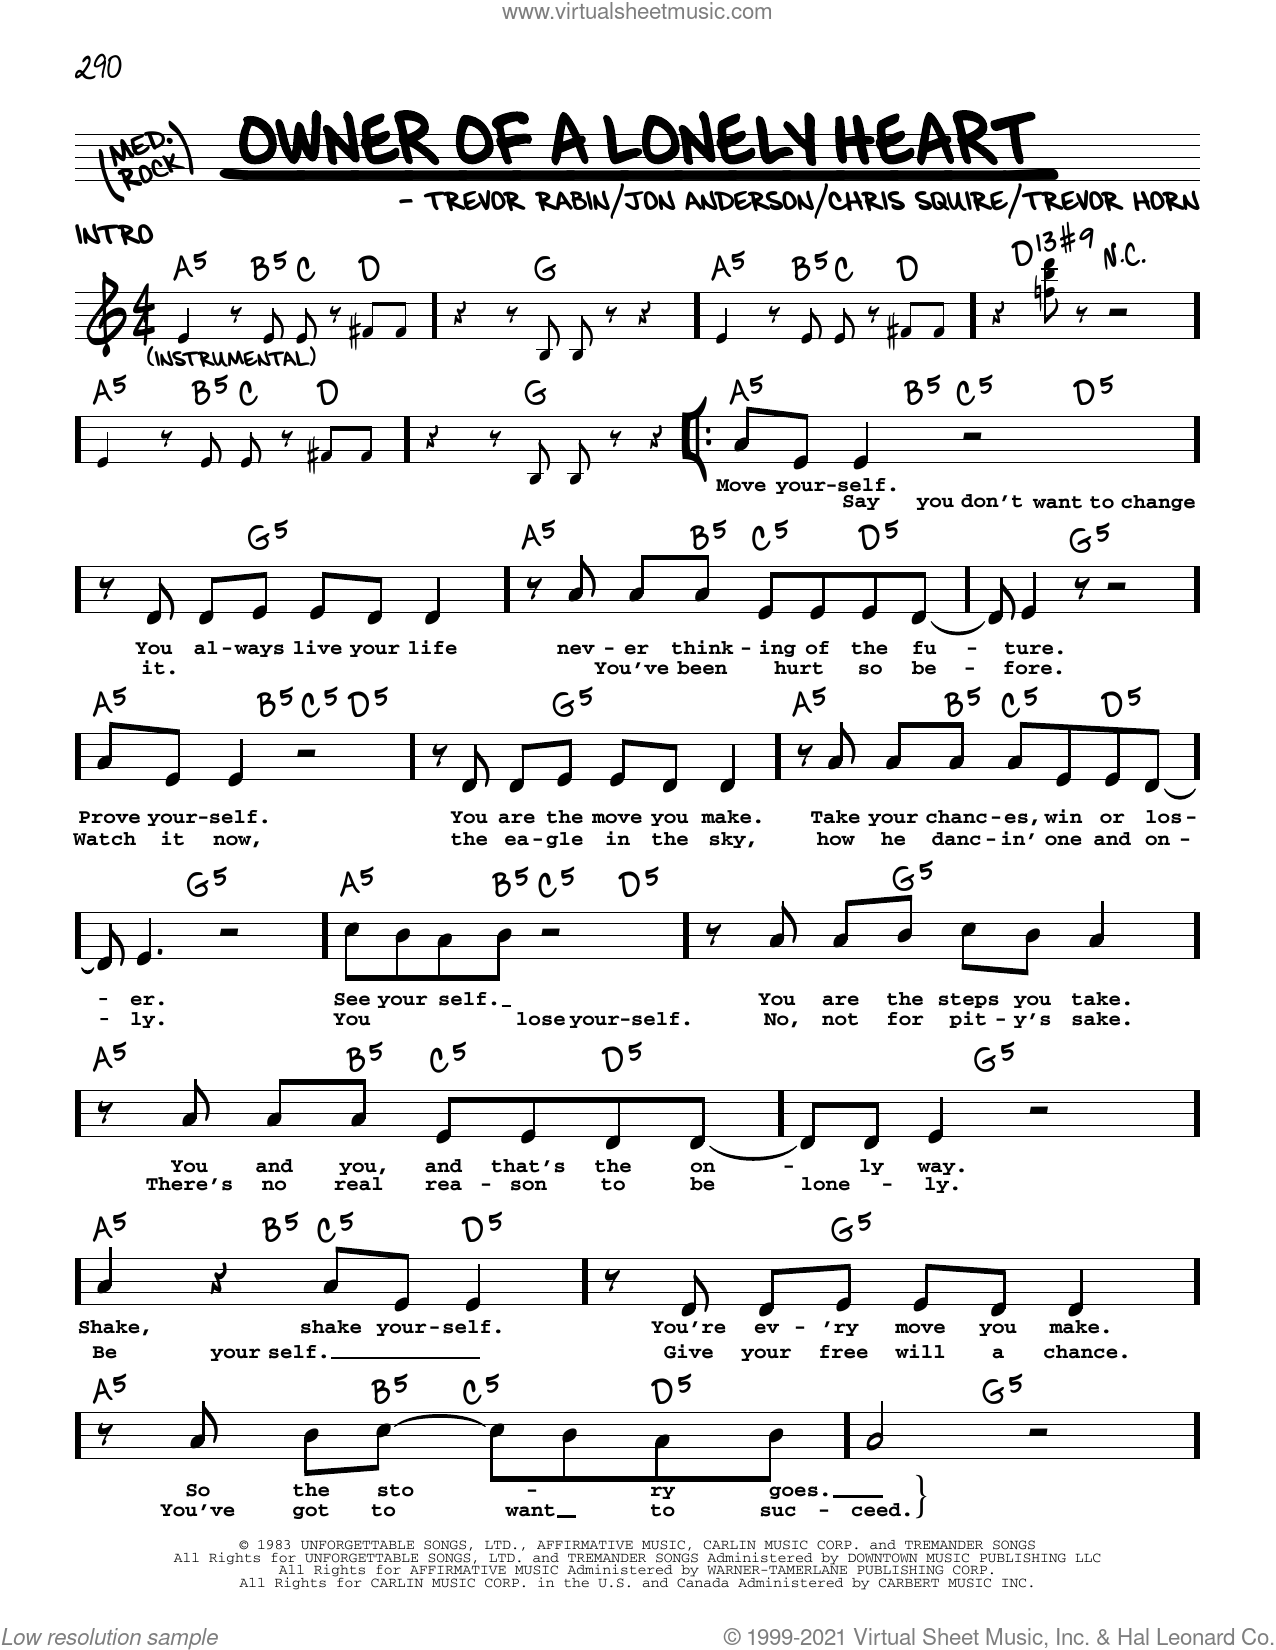 Owner Of A Lonely Heart sheet music (real book with lyrics) (PDF)